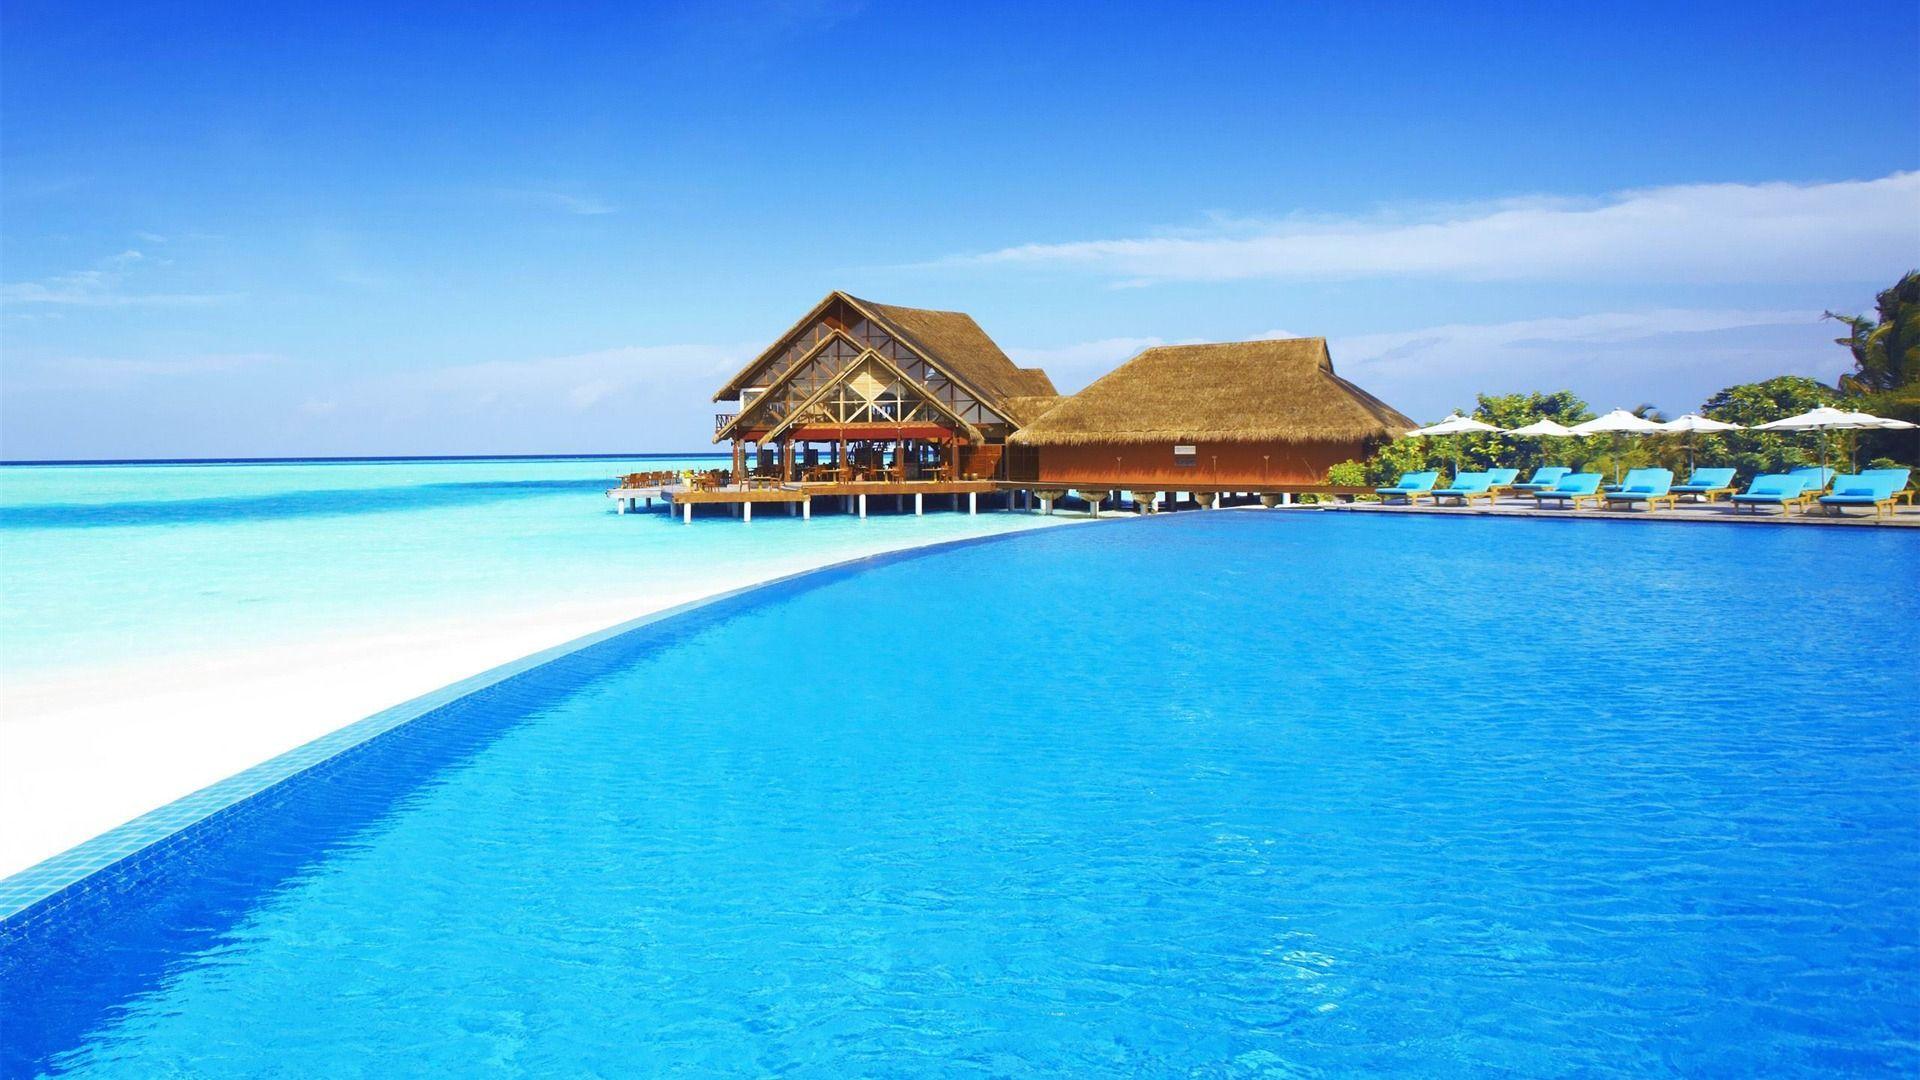 Maldives Islands Resort Wallpapers High Quality Wallpapers